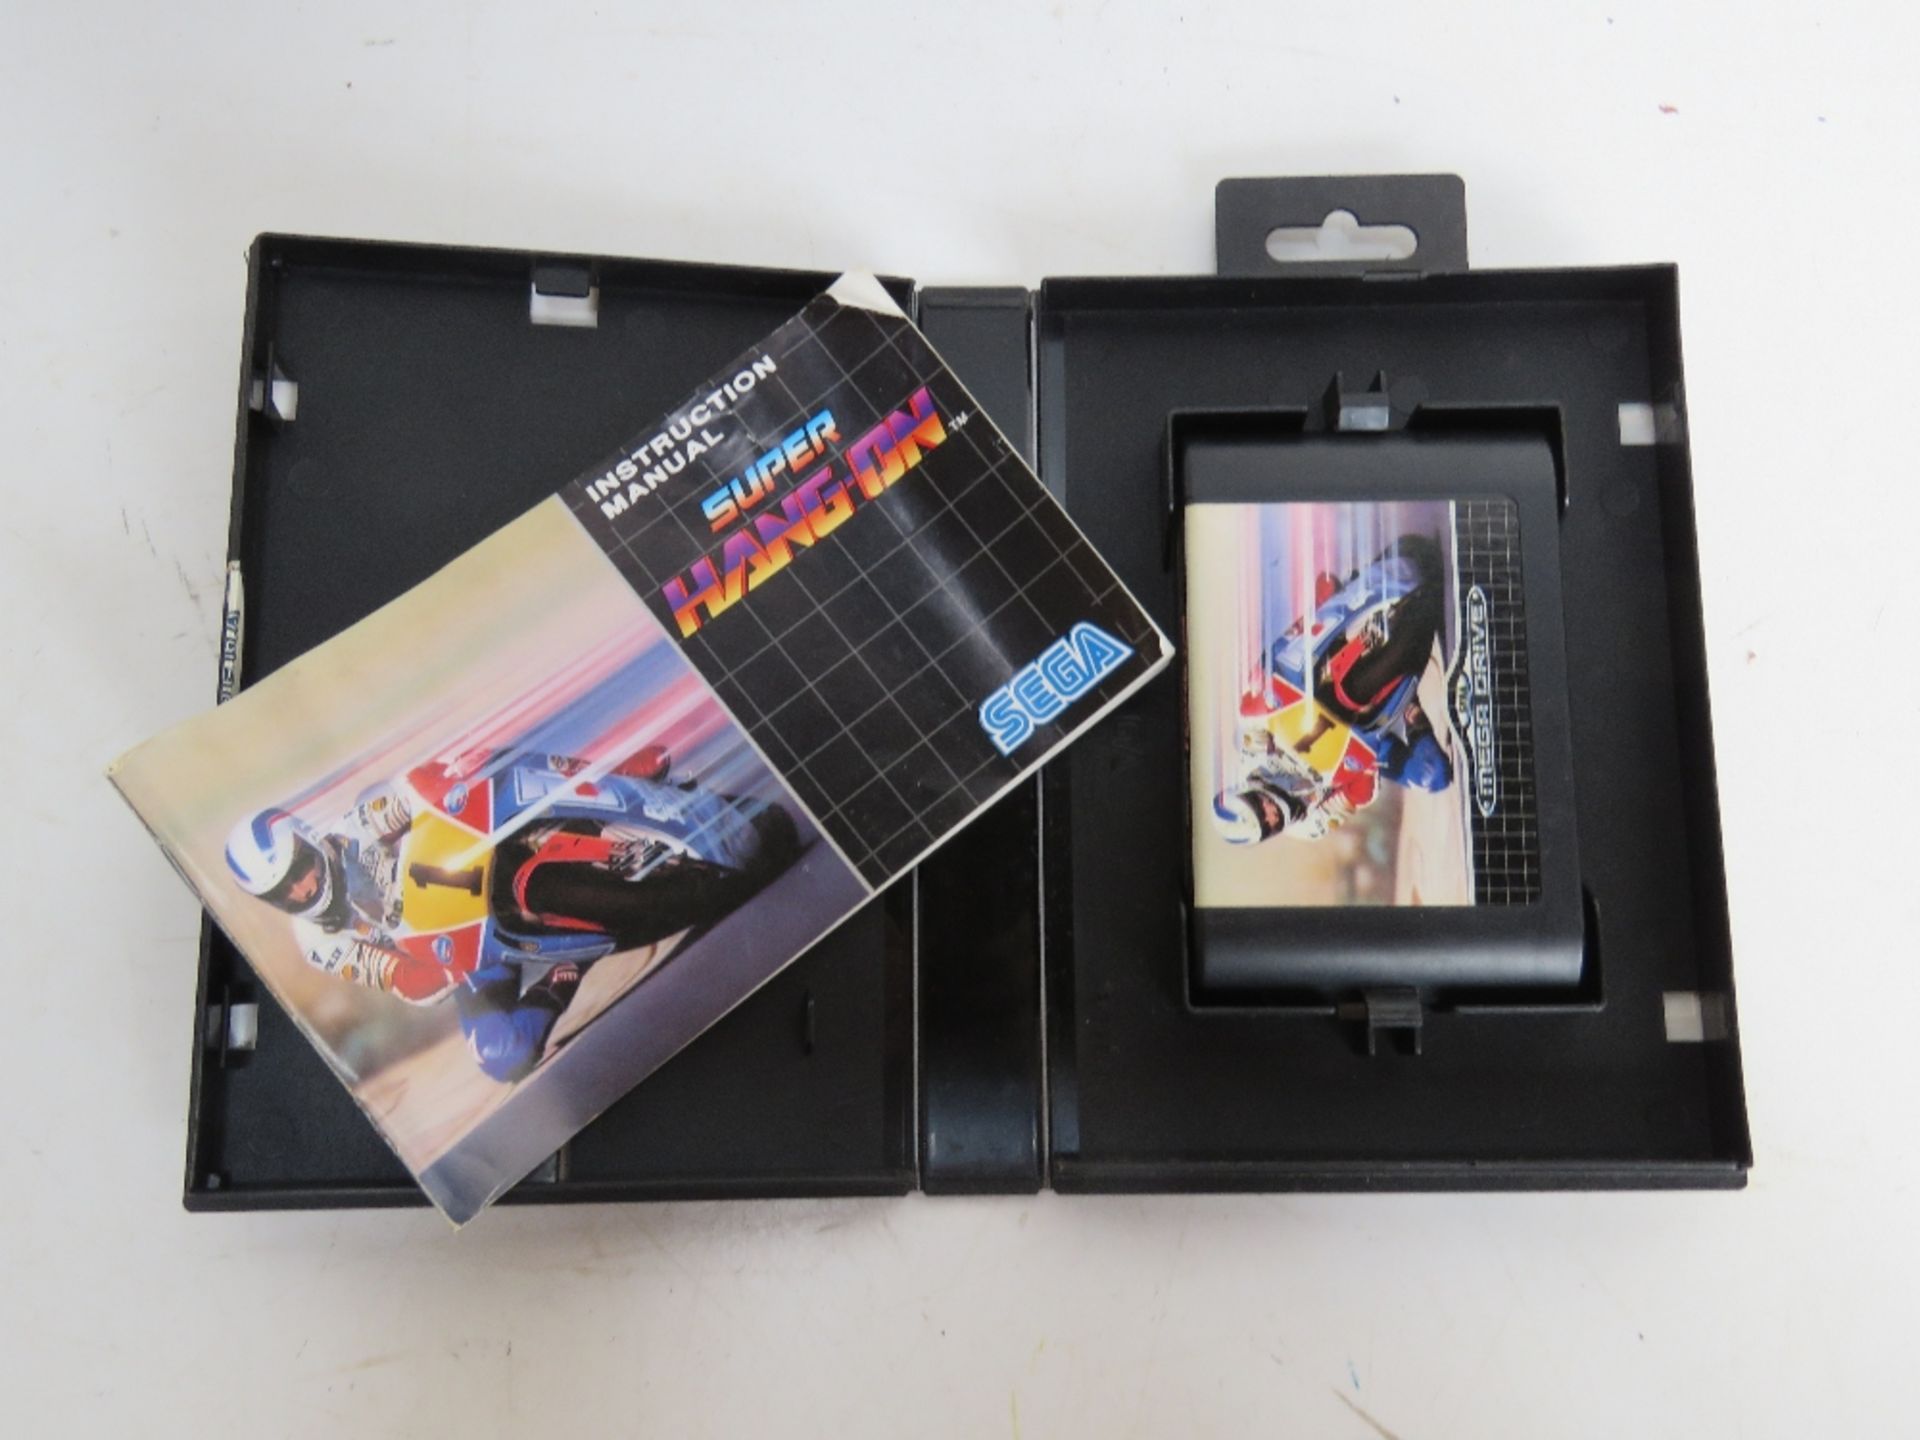 A Sega Megadrive cartridge being Super Hang-On game, with booklet. - Image 2 of 2